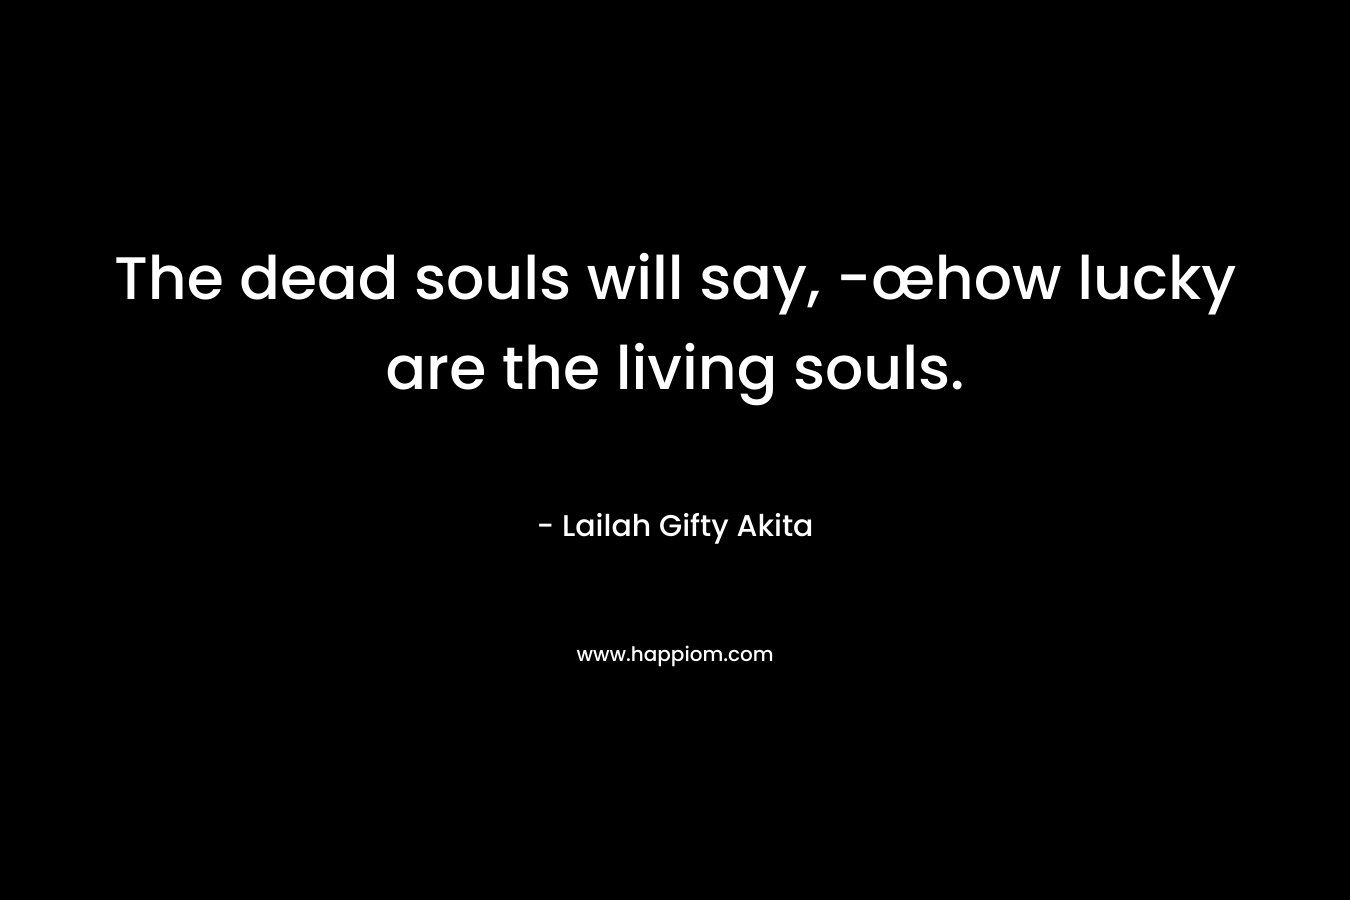 The dead souls will say, -œhow lucky are the living souls.